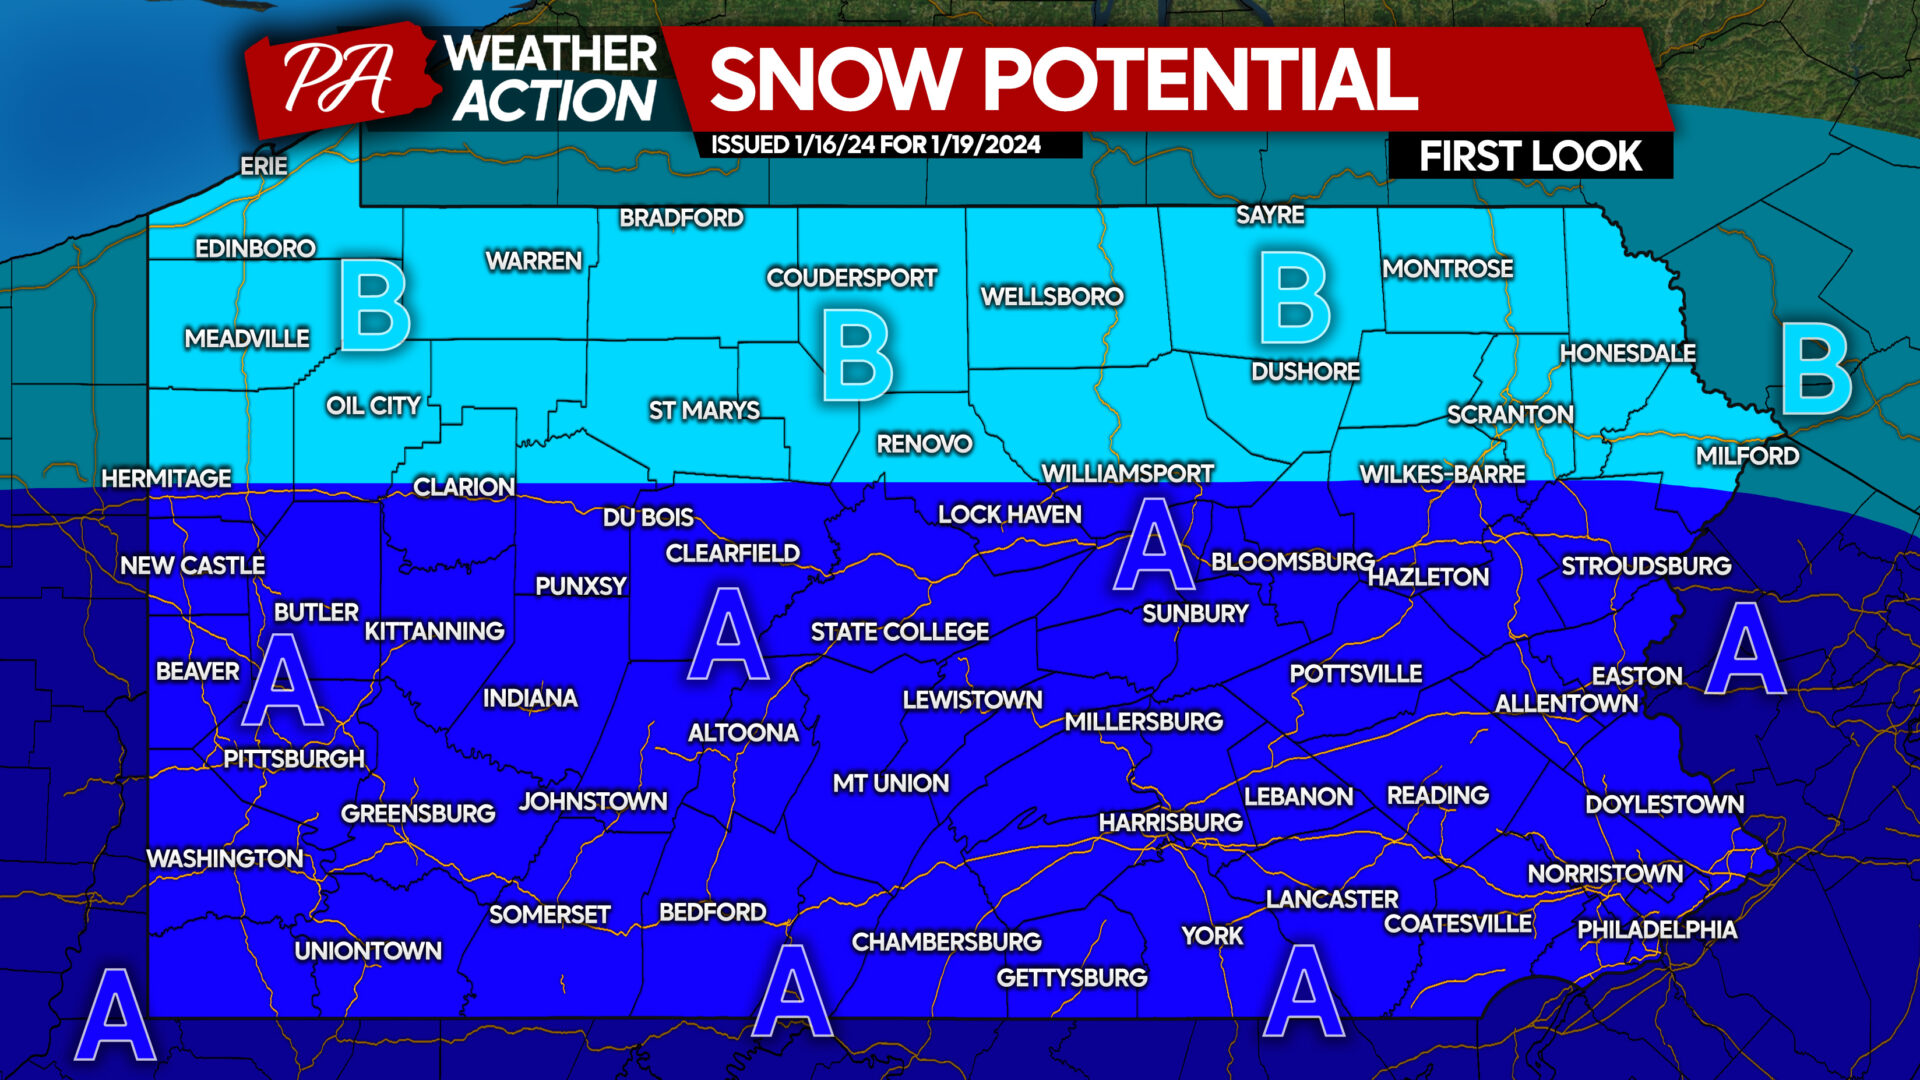 First Look At Snow Potential for Friday 1/19 In Much of Pennsylvania